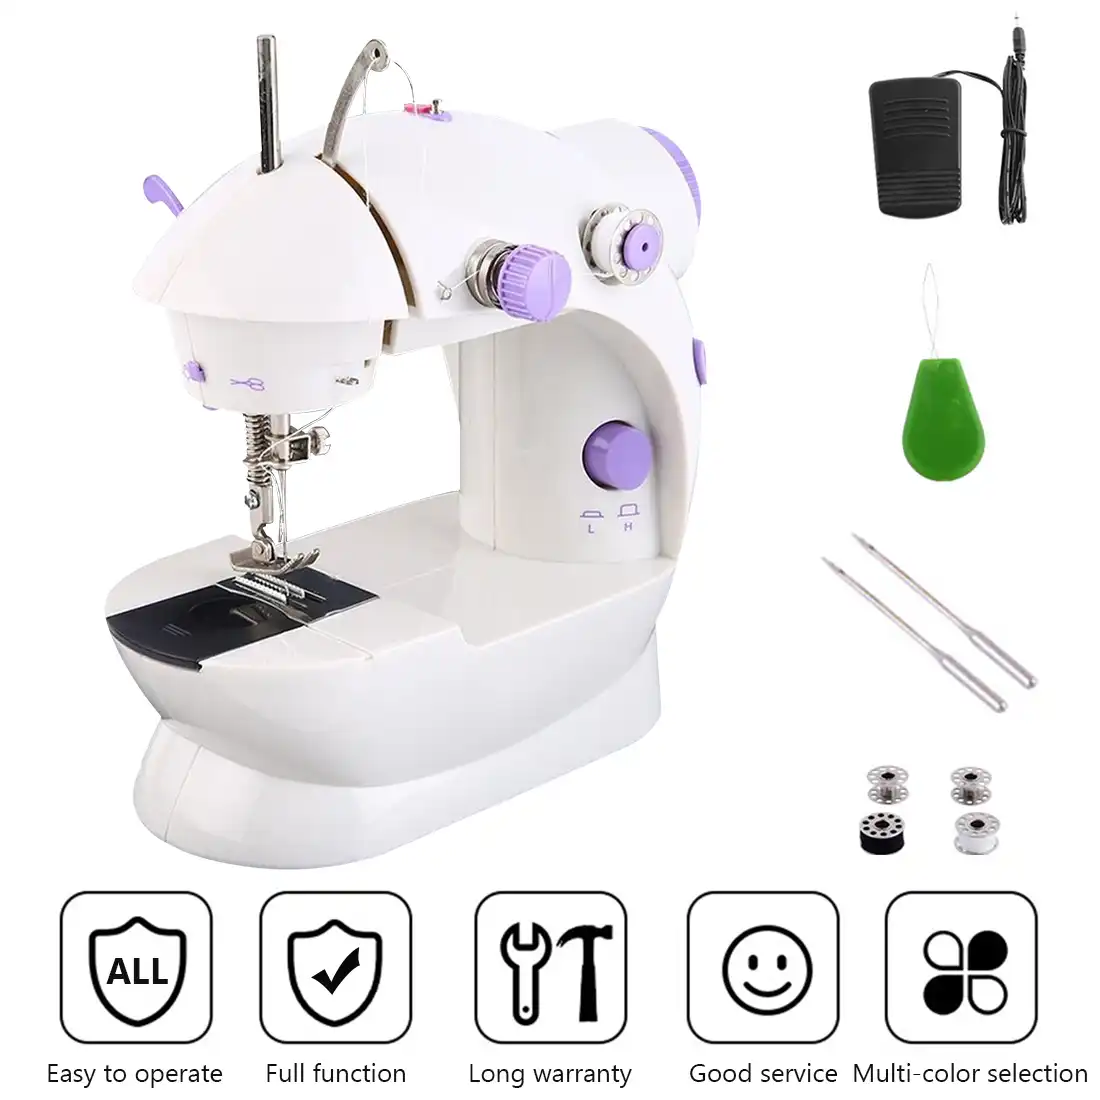 High Low Speed Electric Sewing Machine Multifunction Portable Basic Sewing Machine with Extension Table and Color Lines for Sewing Beginner Household Sewing with 39 Color Lines,British Standard